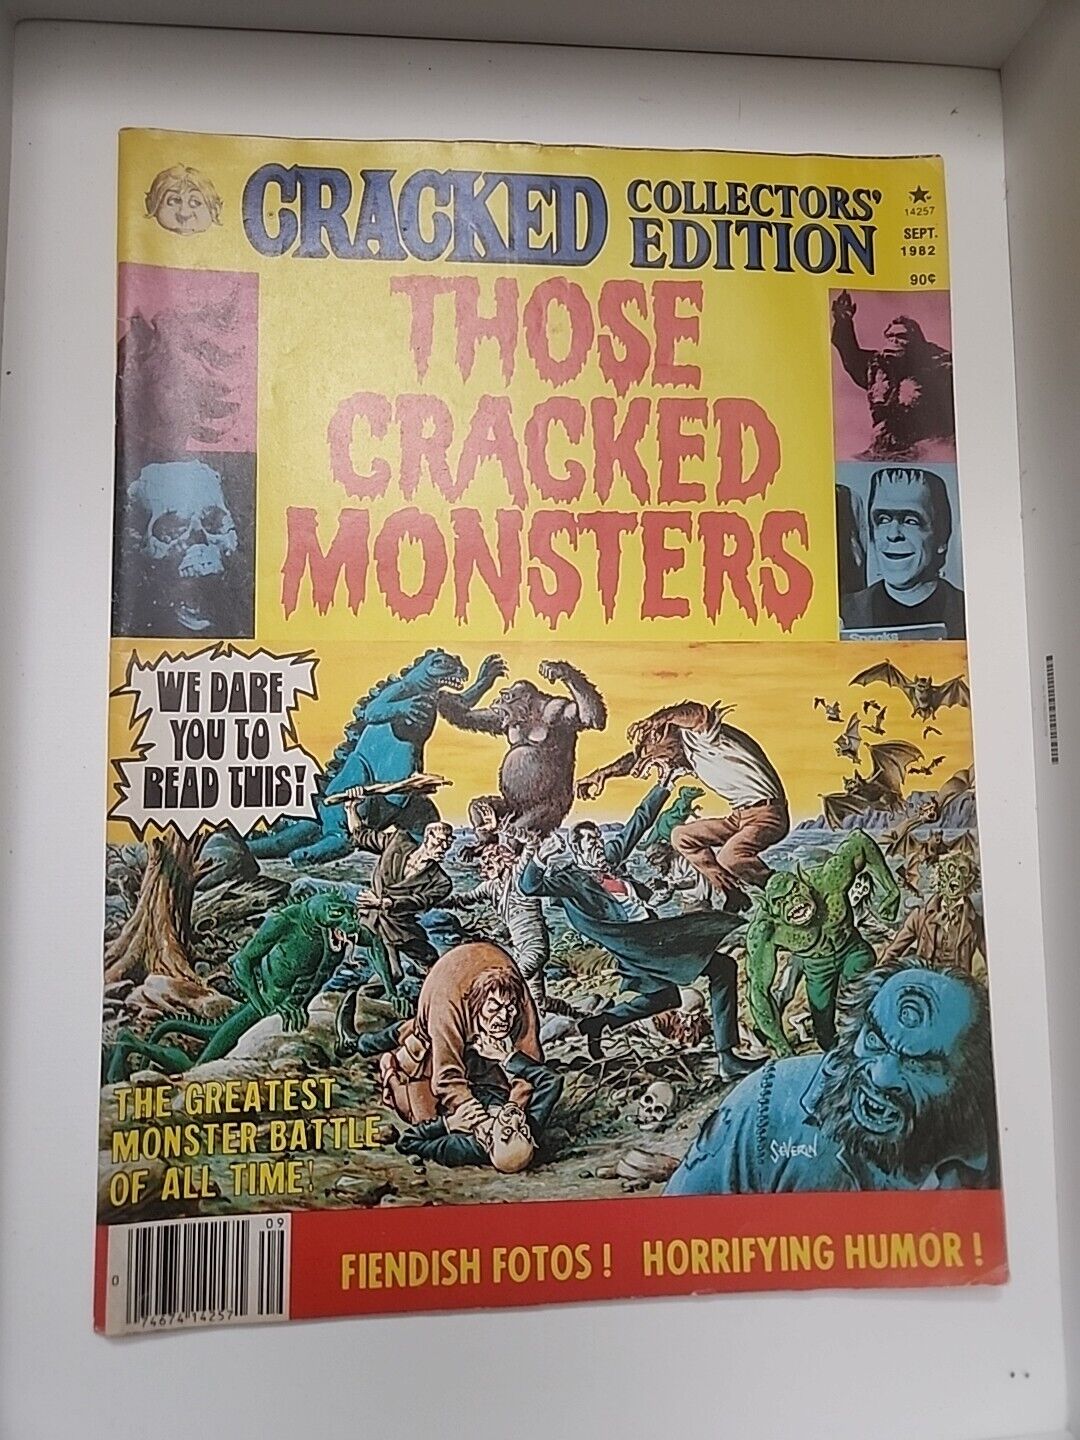 Cracked Collector's Edition Those Cracked Monsters September 1982